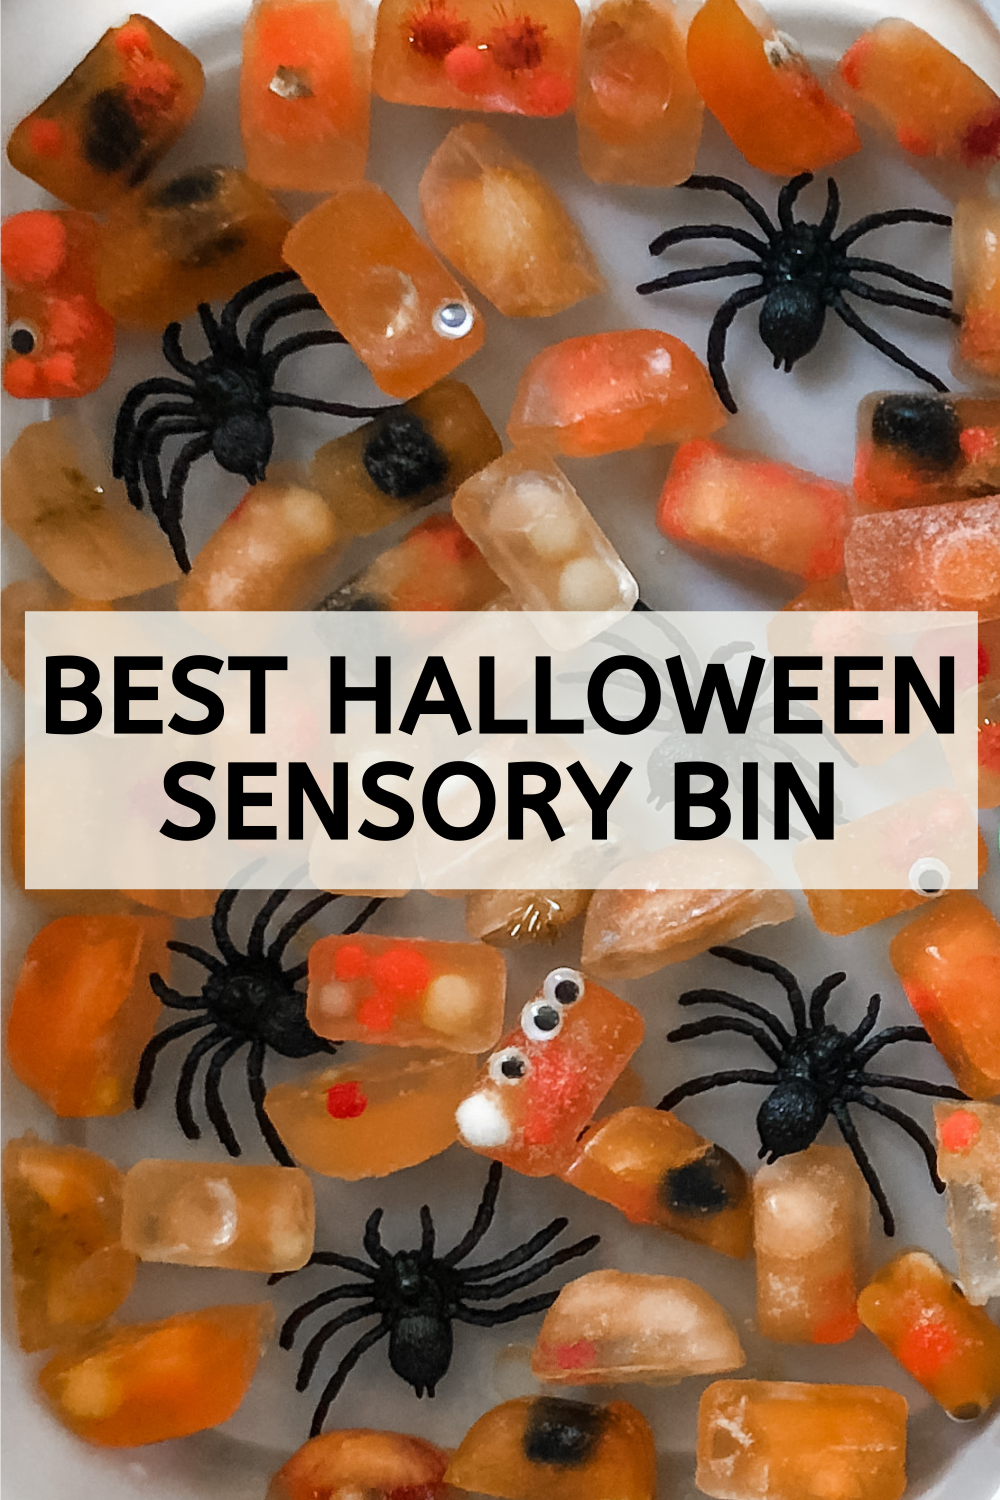 The Best Halloween Sensory Bin for Toddlers